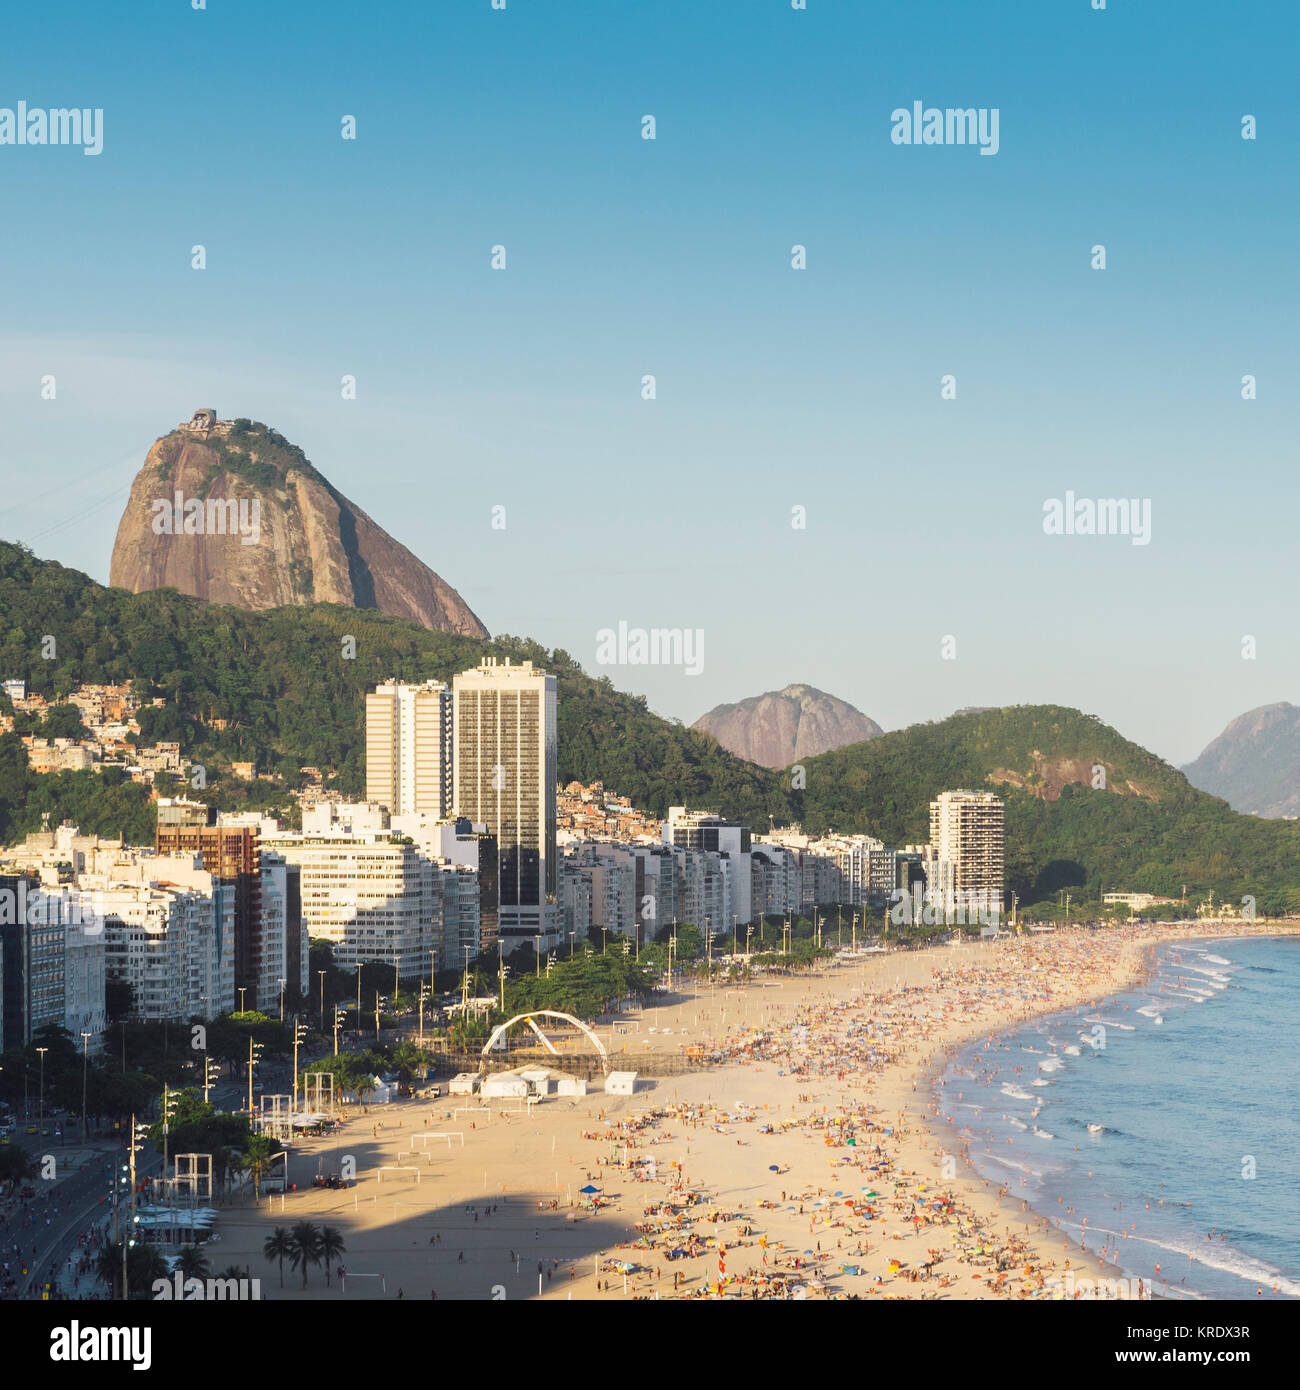 Aerial view of Copacabana, Rio de Janeiro, Brazil with the iconic Sugarloaf Mountain in the background Stock Photo